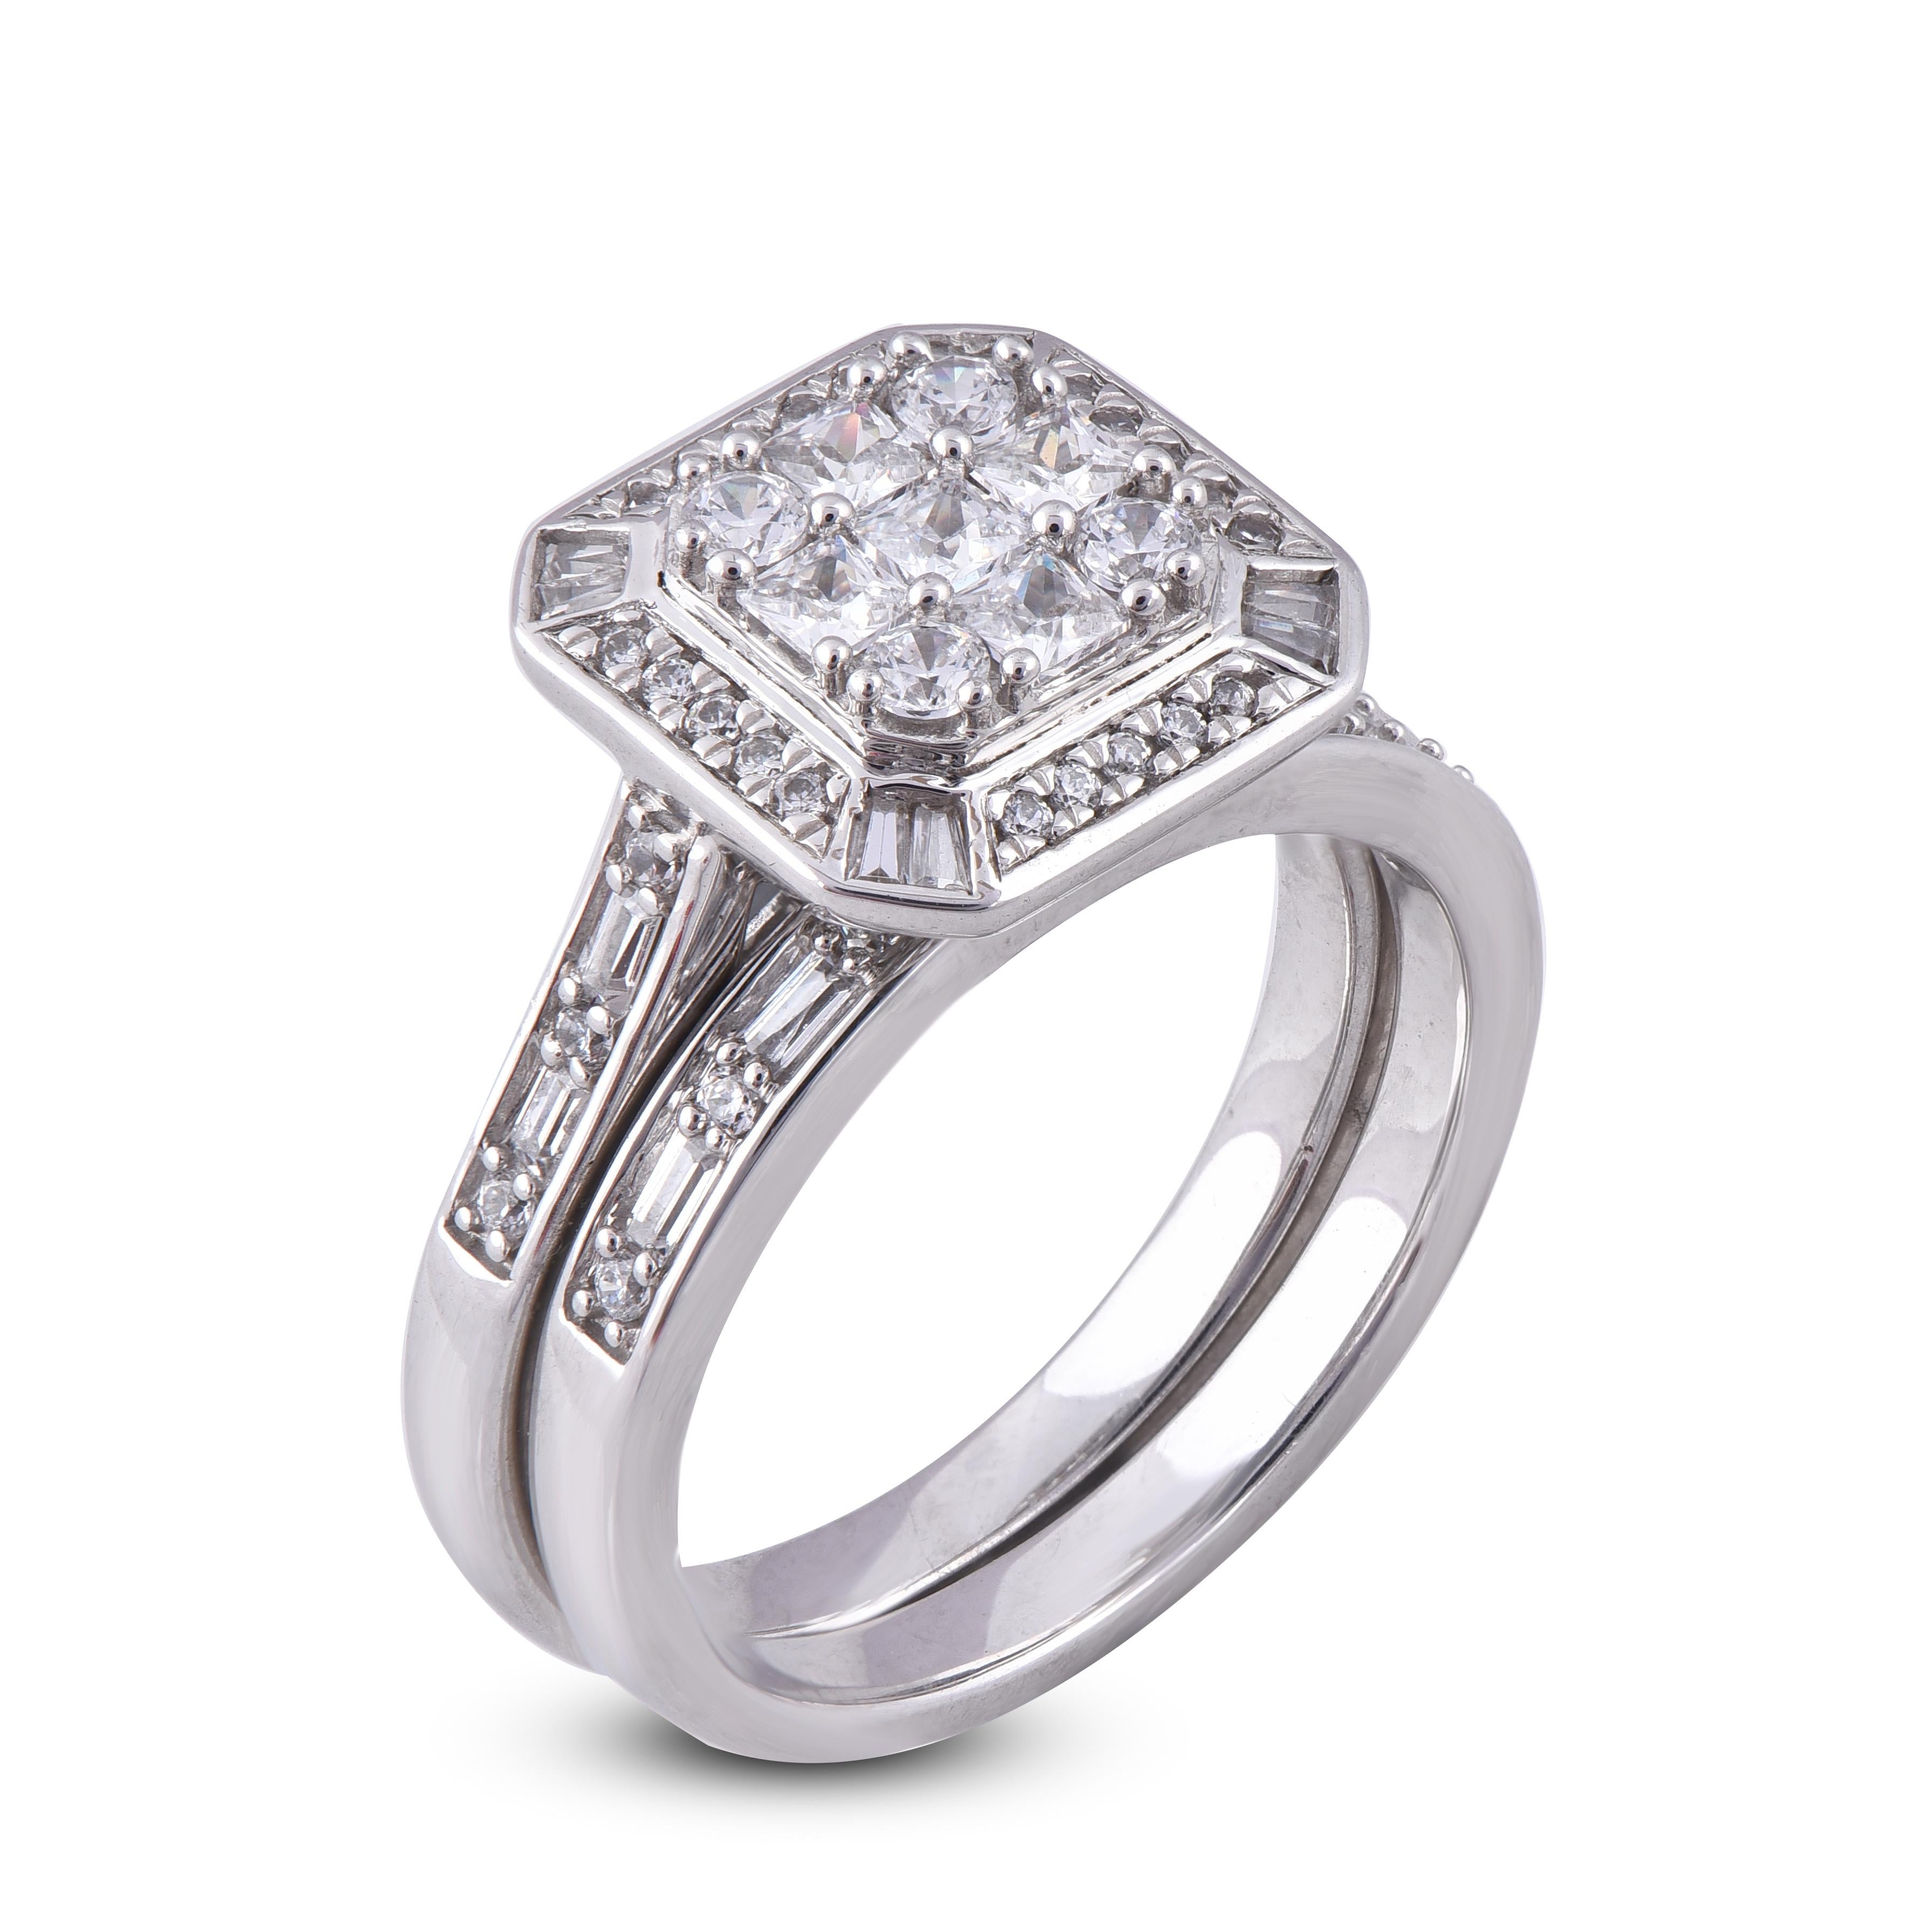 This ring is crafted with 14 karat gold in your choice of white, rose, or yellow, and features 37 round 18 Baguette and 5 princess cut diamonds set in prong, pave and channel setting. H-I color I2 clarity and a high polish finish complete the